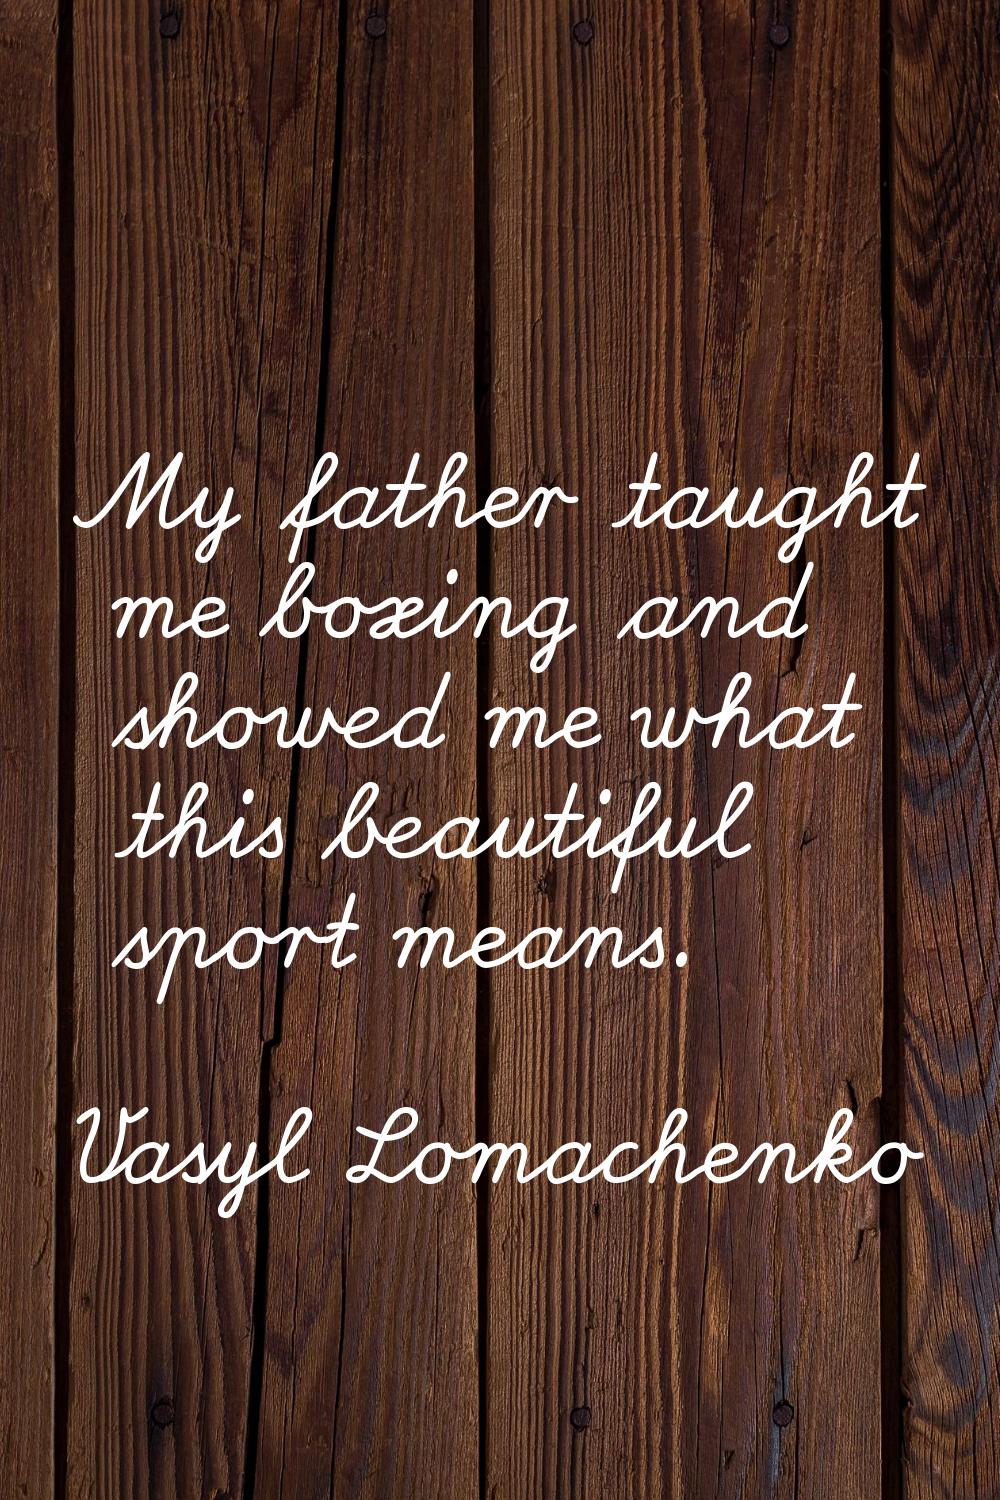 My father taught me boxing and showed me what this beautiful sport means.